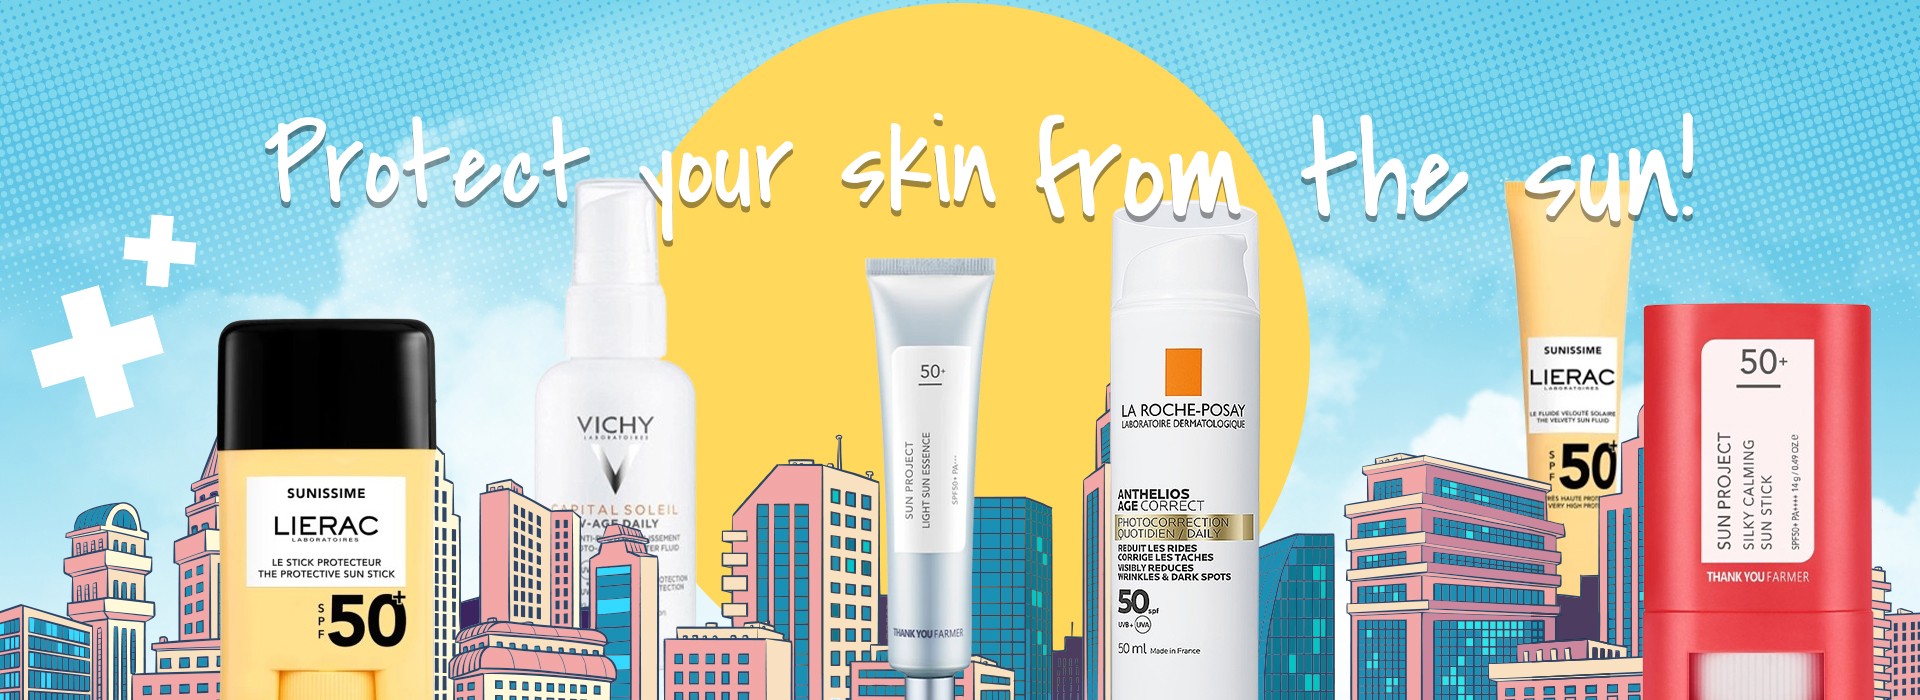 Protect your skin from the sun